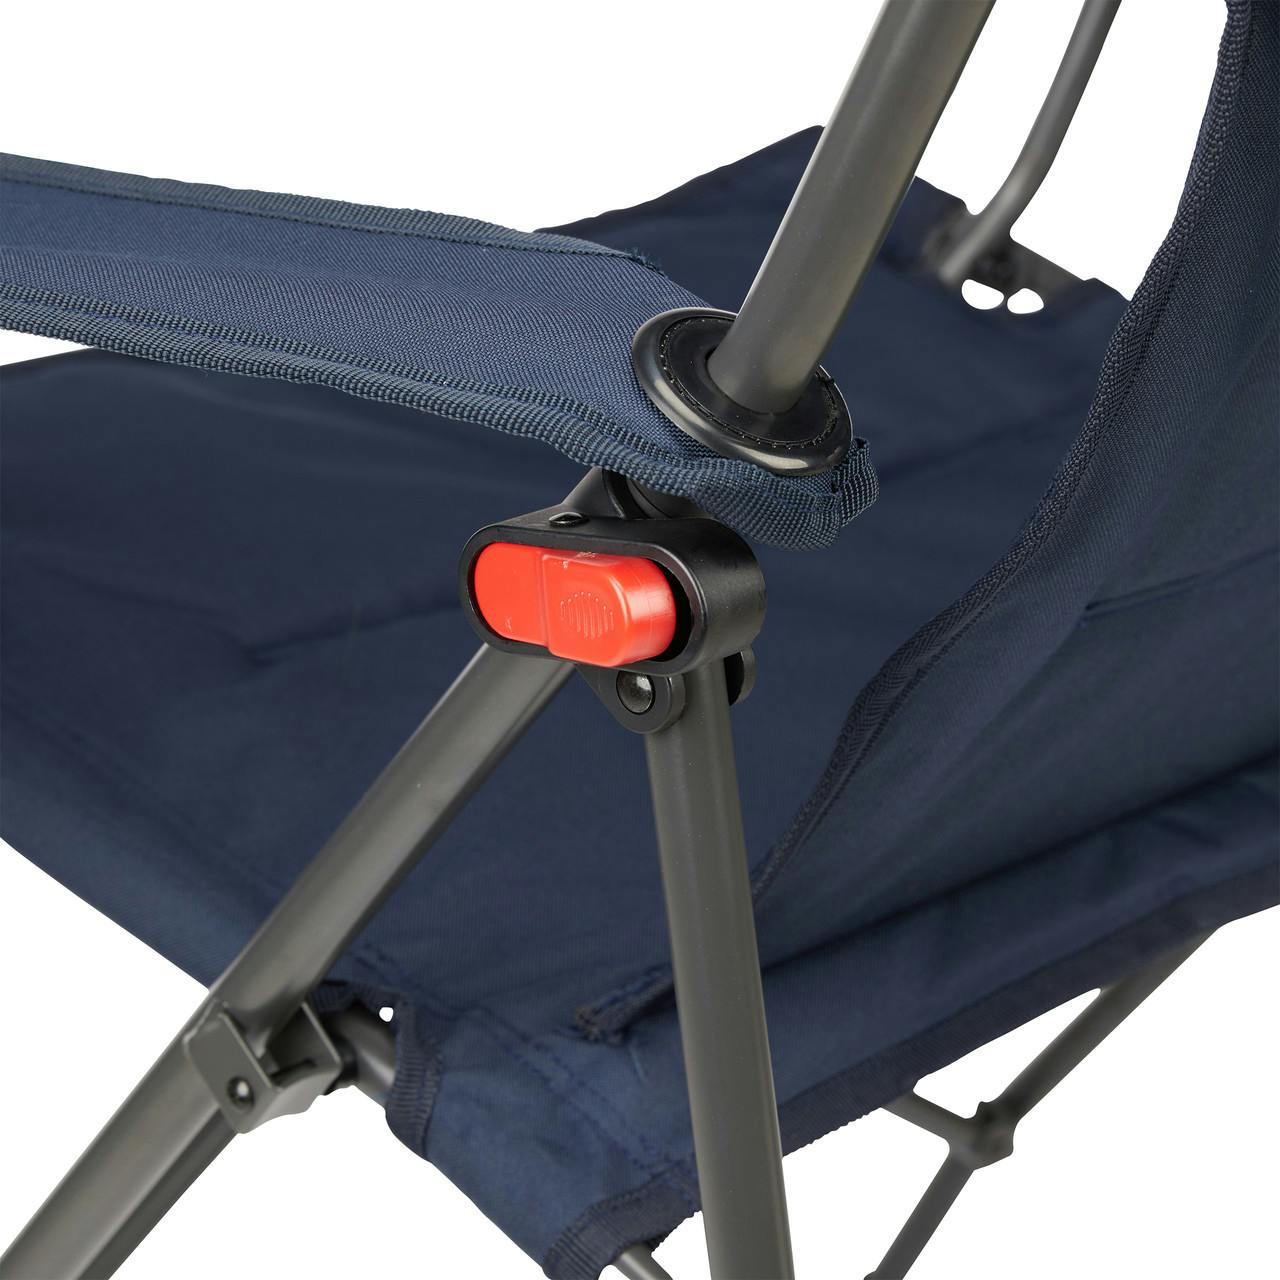 Chaise Base Camp Deluxe Marine profond